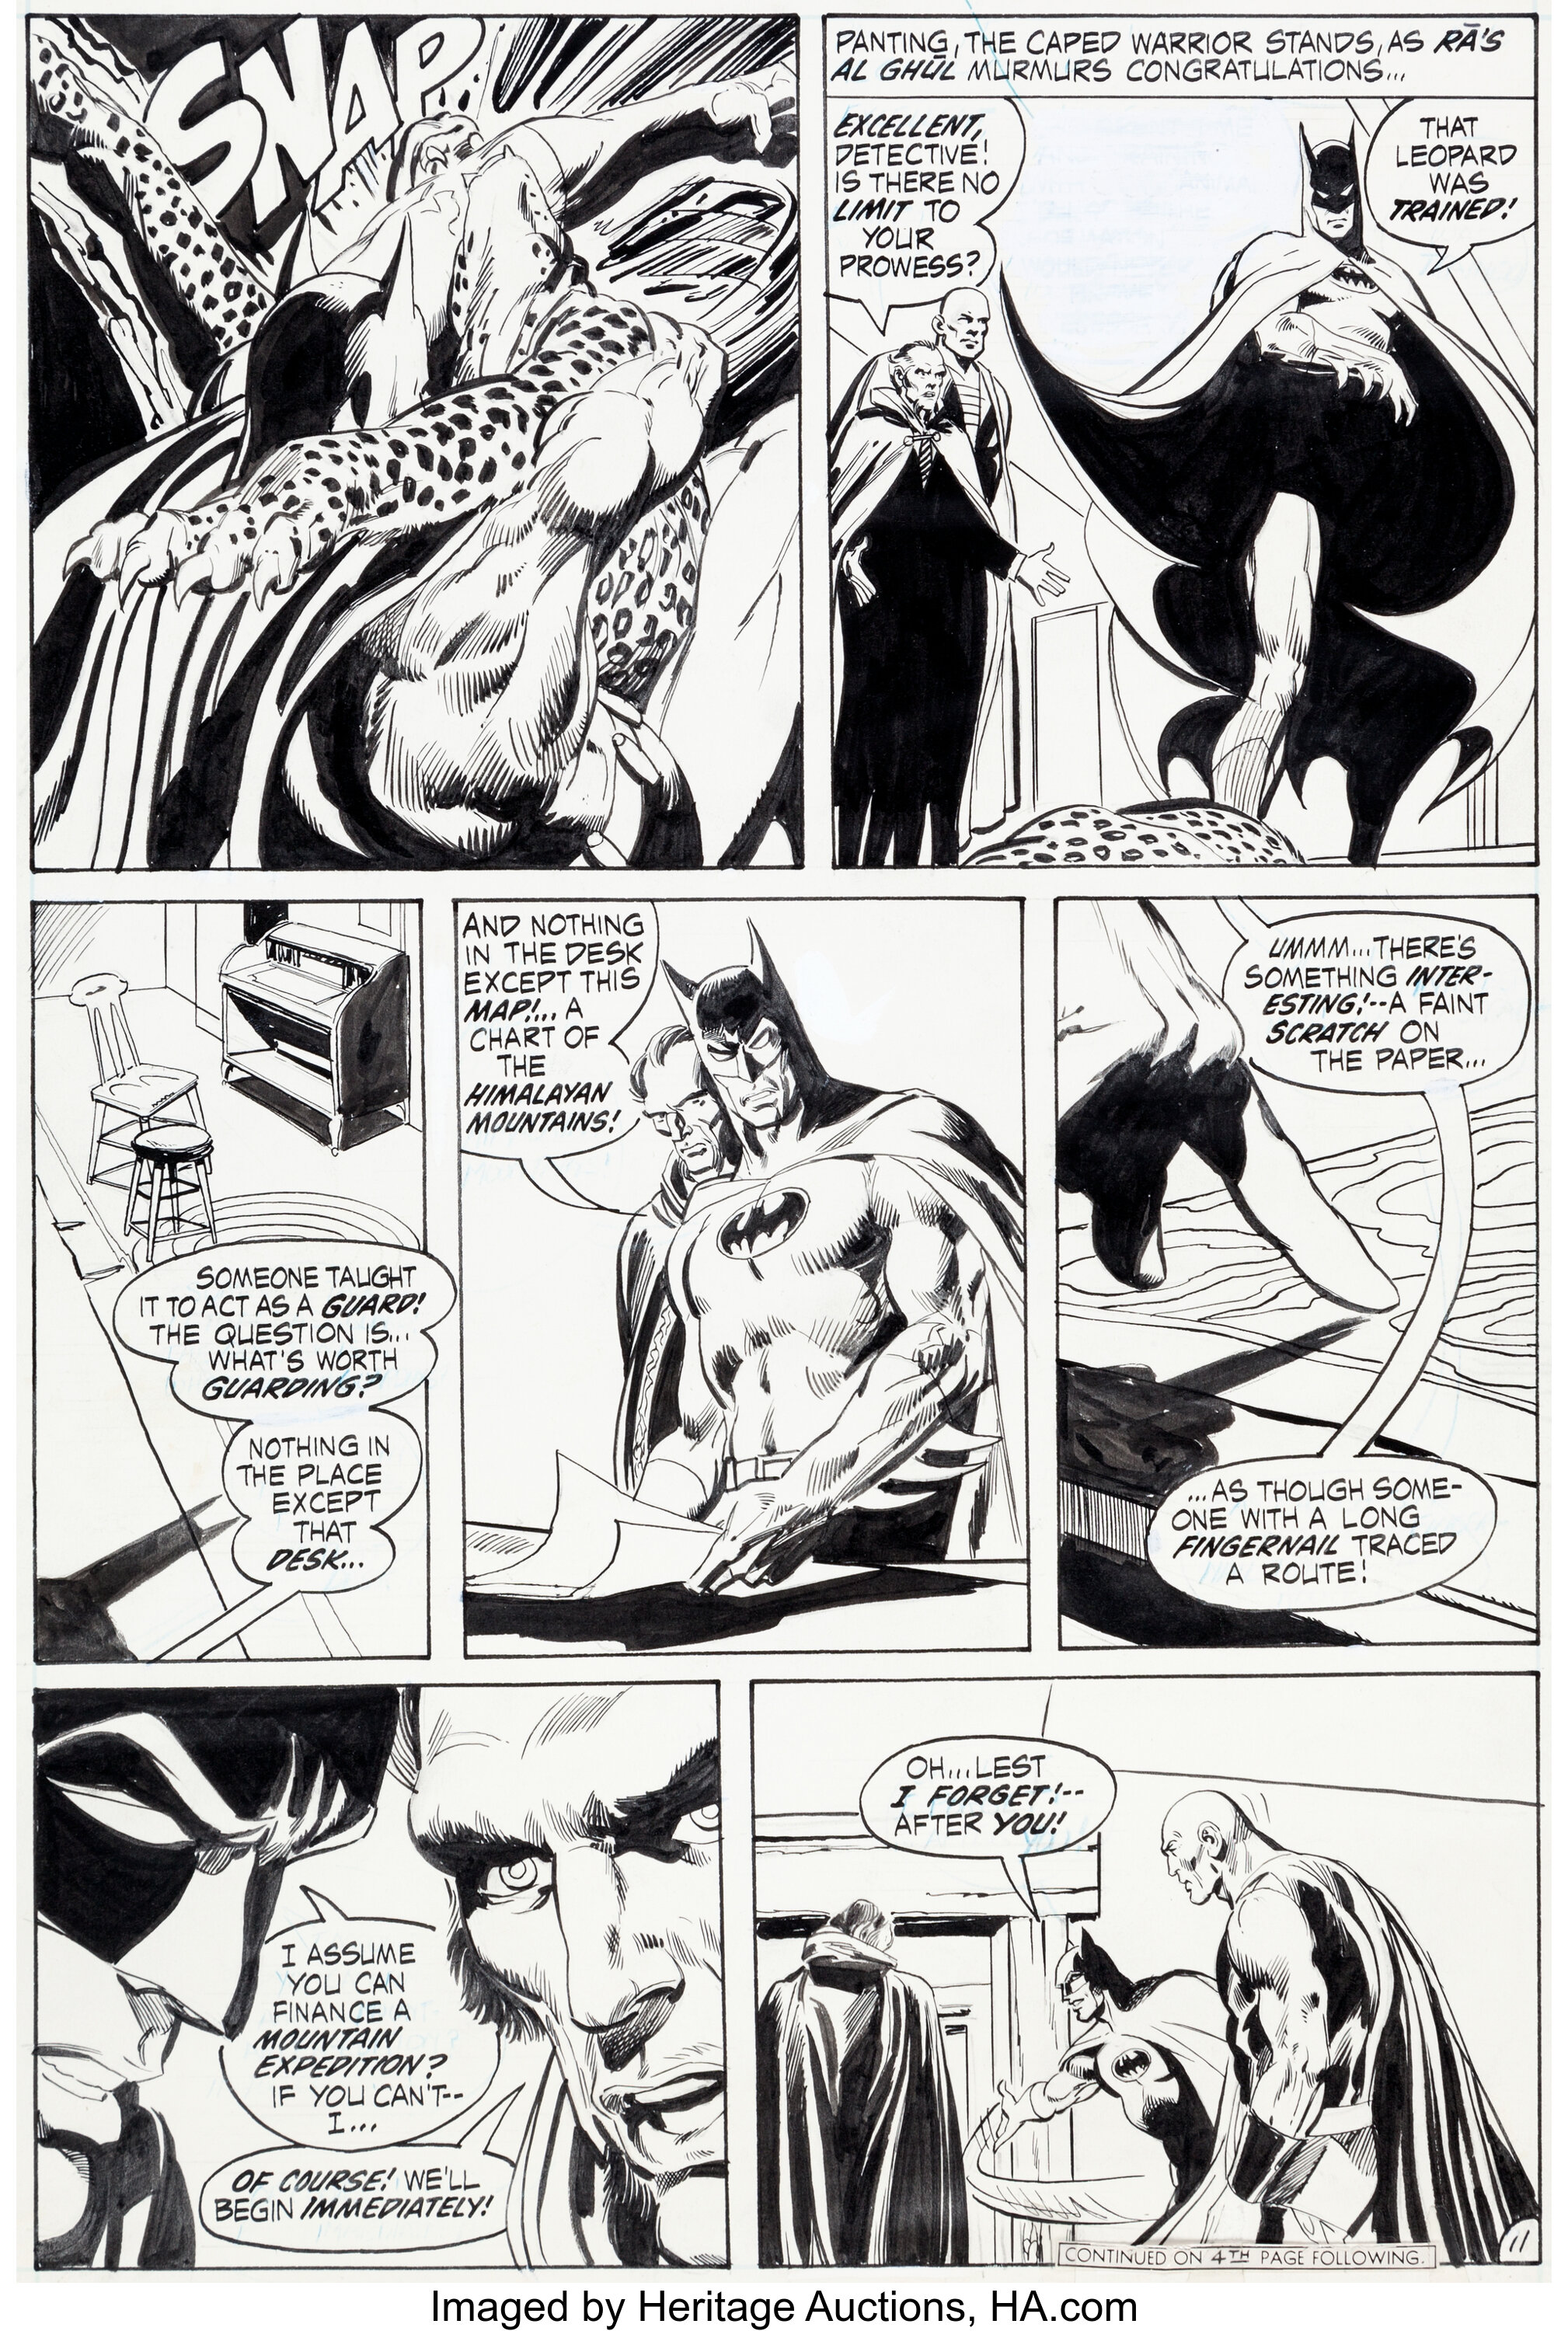 Neal Adams and Dick Giordano Batman #232 Page 11 Original Art (DC, | Lot  #92007 | Heritage Auctions